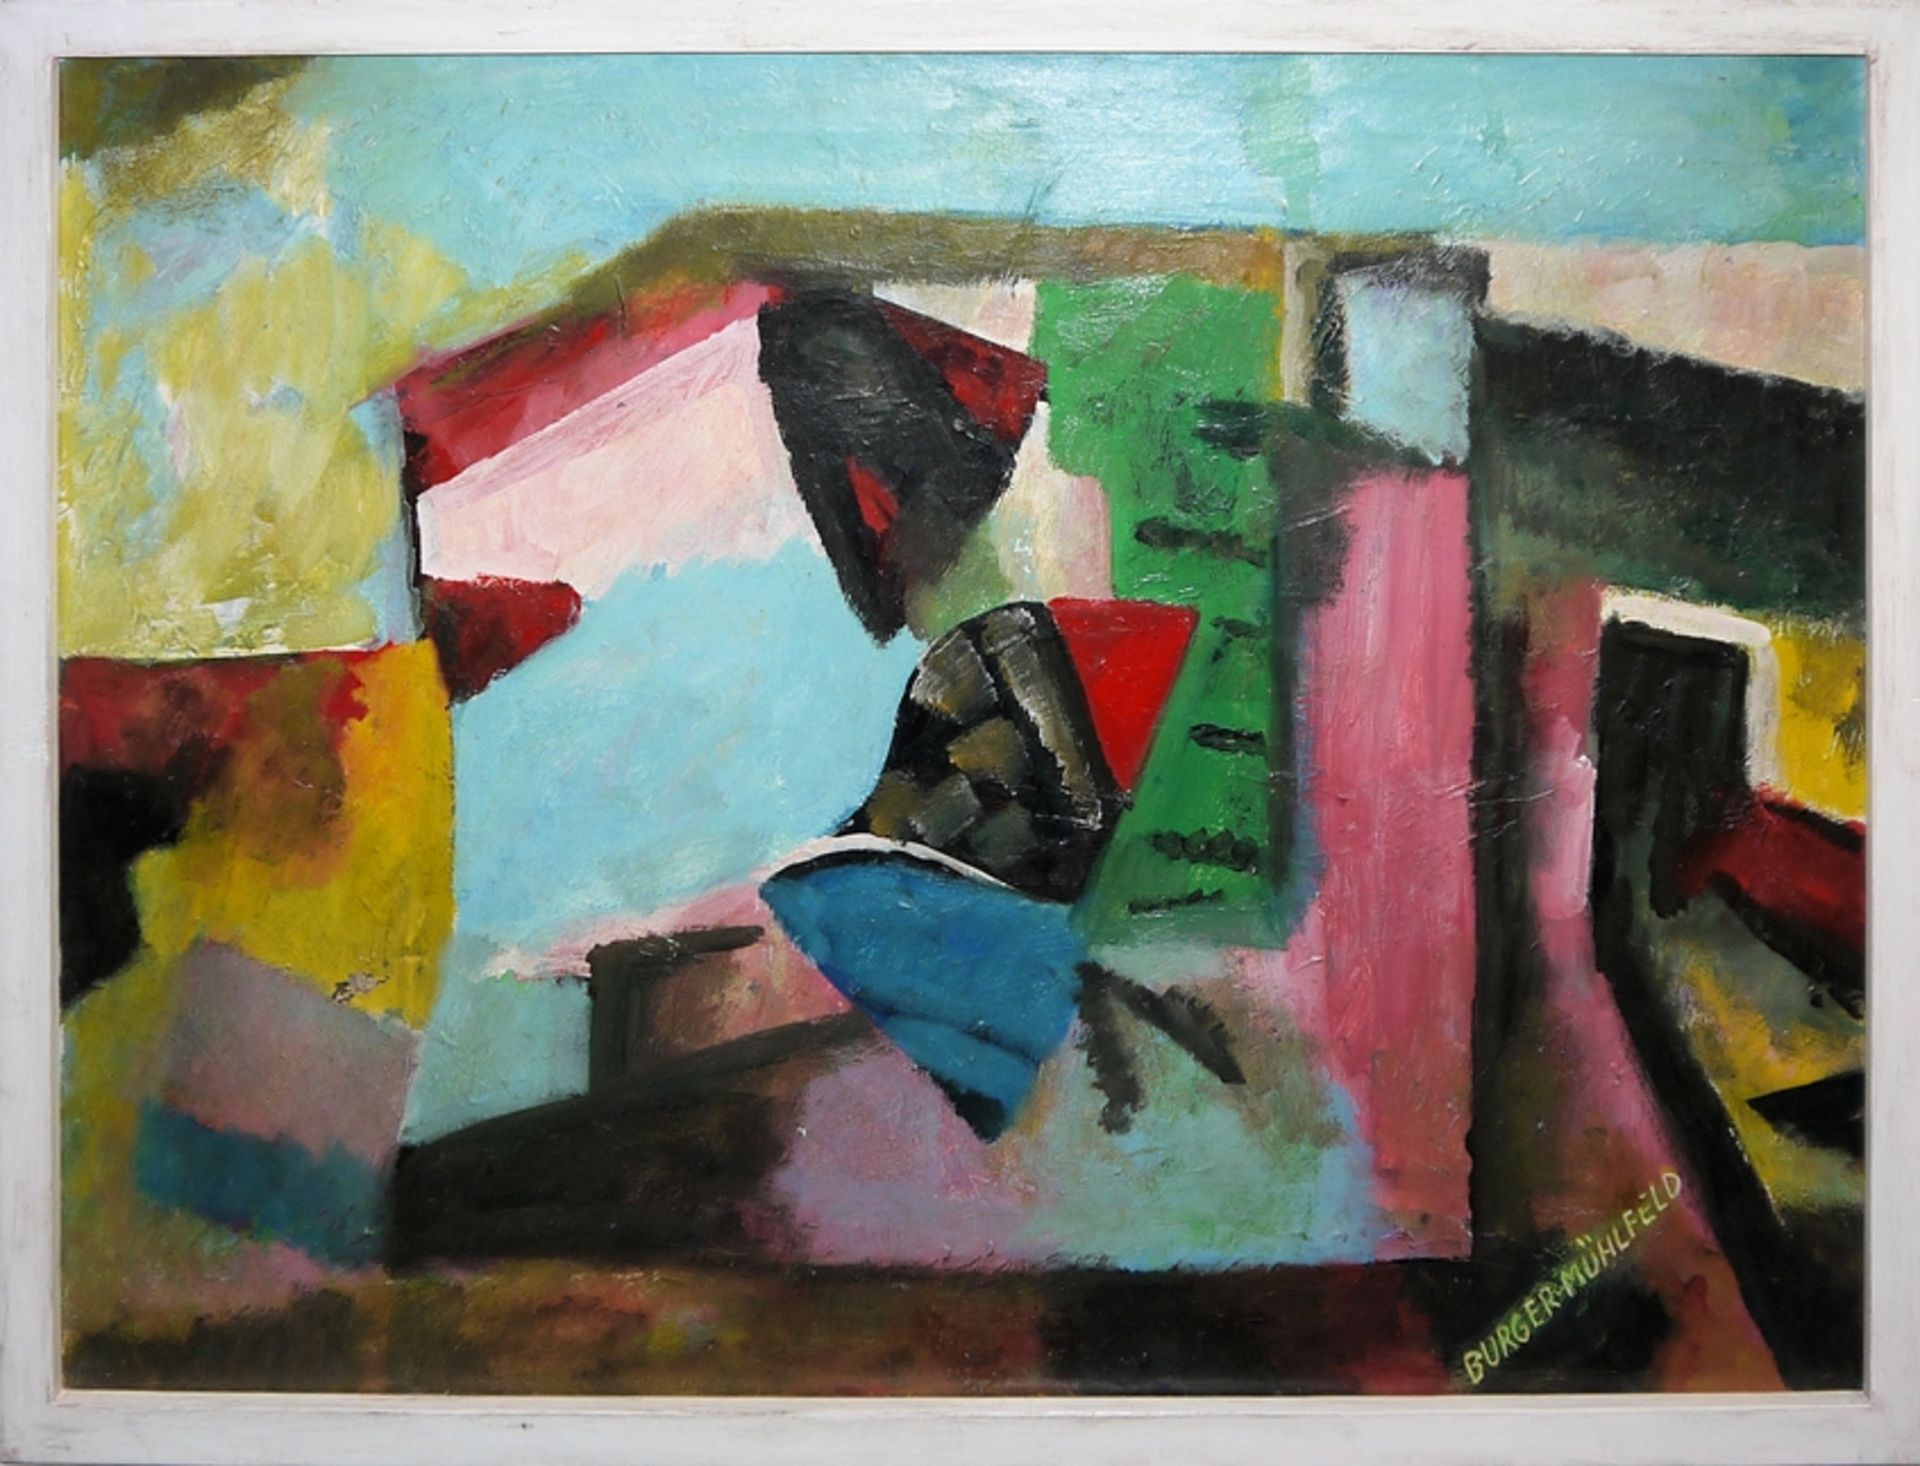 Fritz Burger-Mühlfeld, Large Abstraction, oil painting c. 1940/50, framed - Image 3 of 4